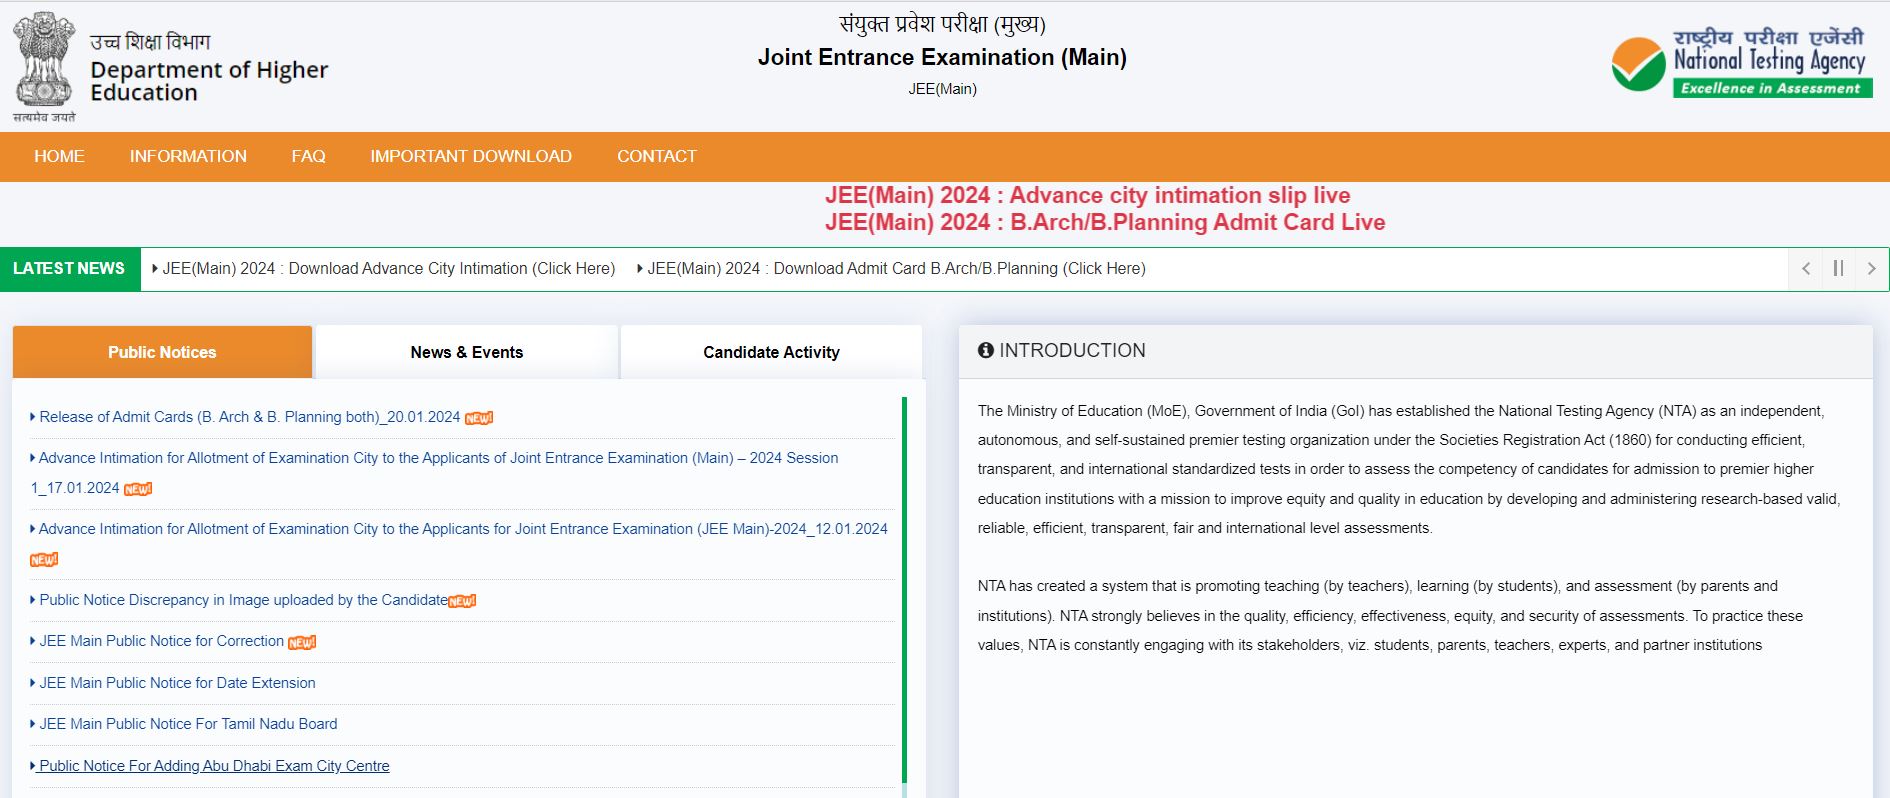 JEE Mains Admit Card 2024, Session 2 Hall Ticket Download Link_4.1